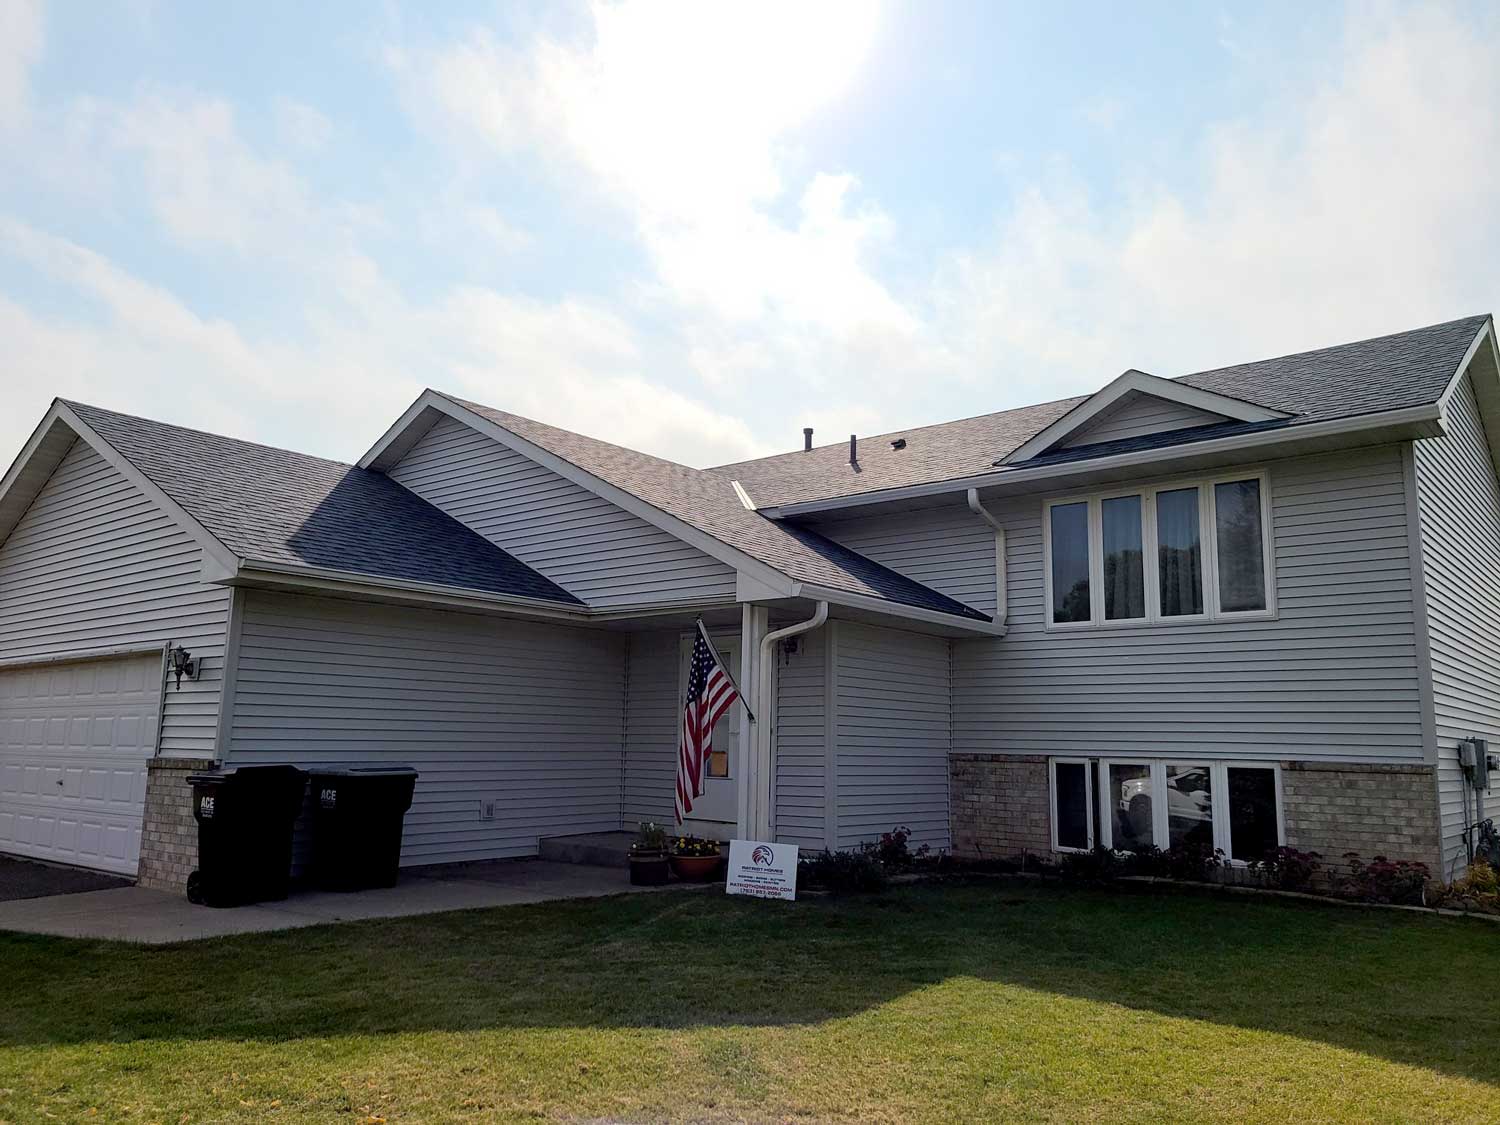 Patriot Homes After Photo of Siding and roofing restoration work.